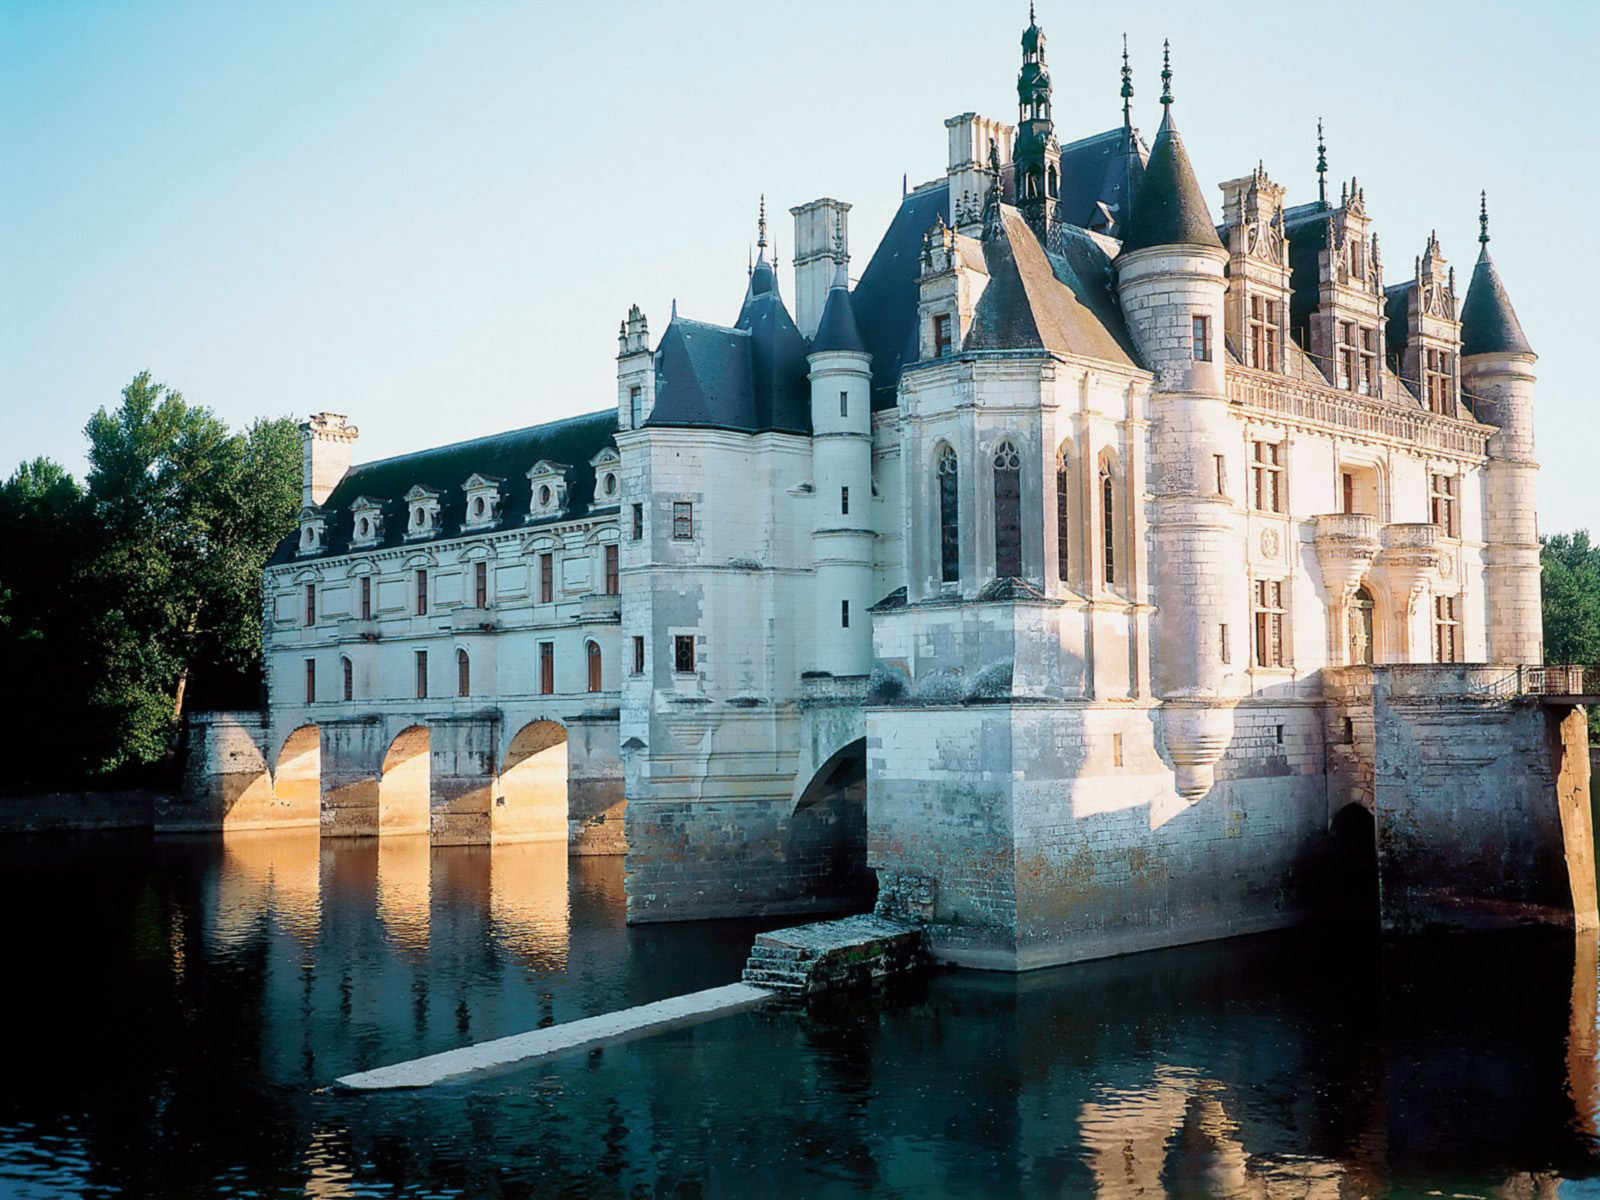 Chenonceaux Castle in France